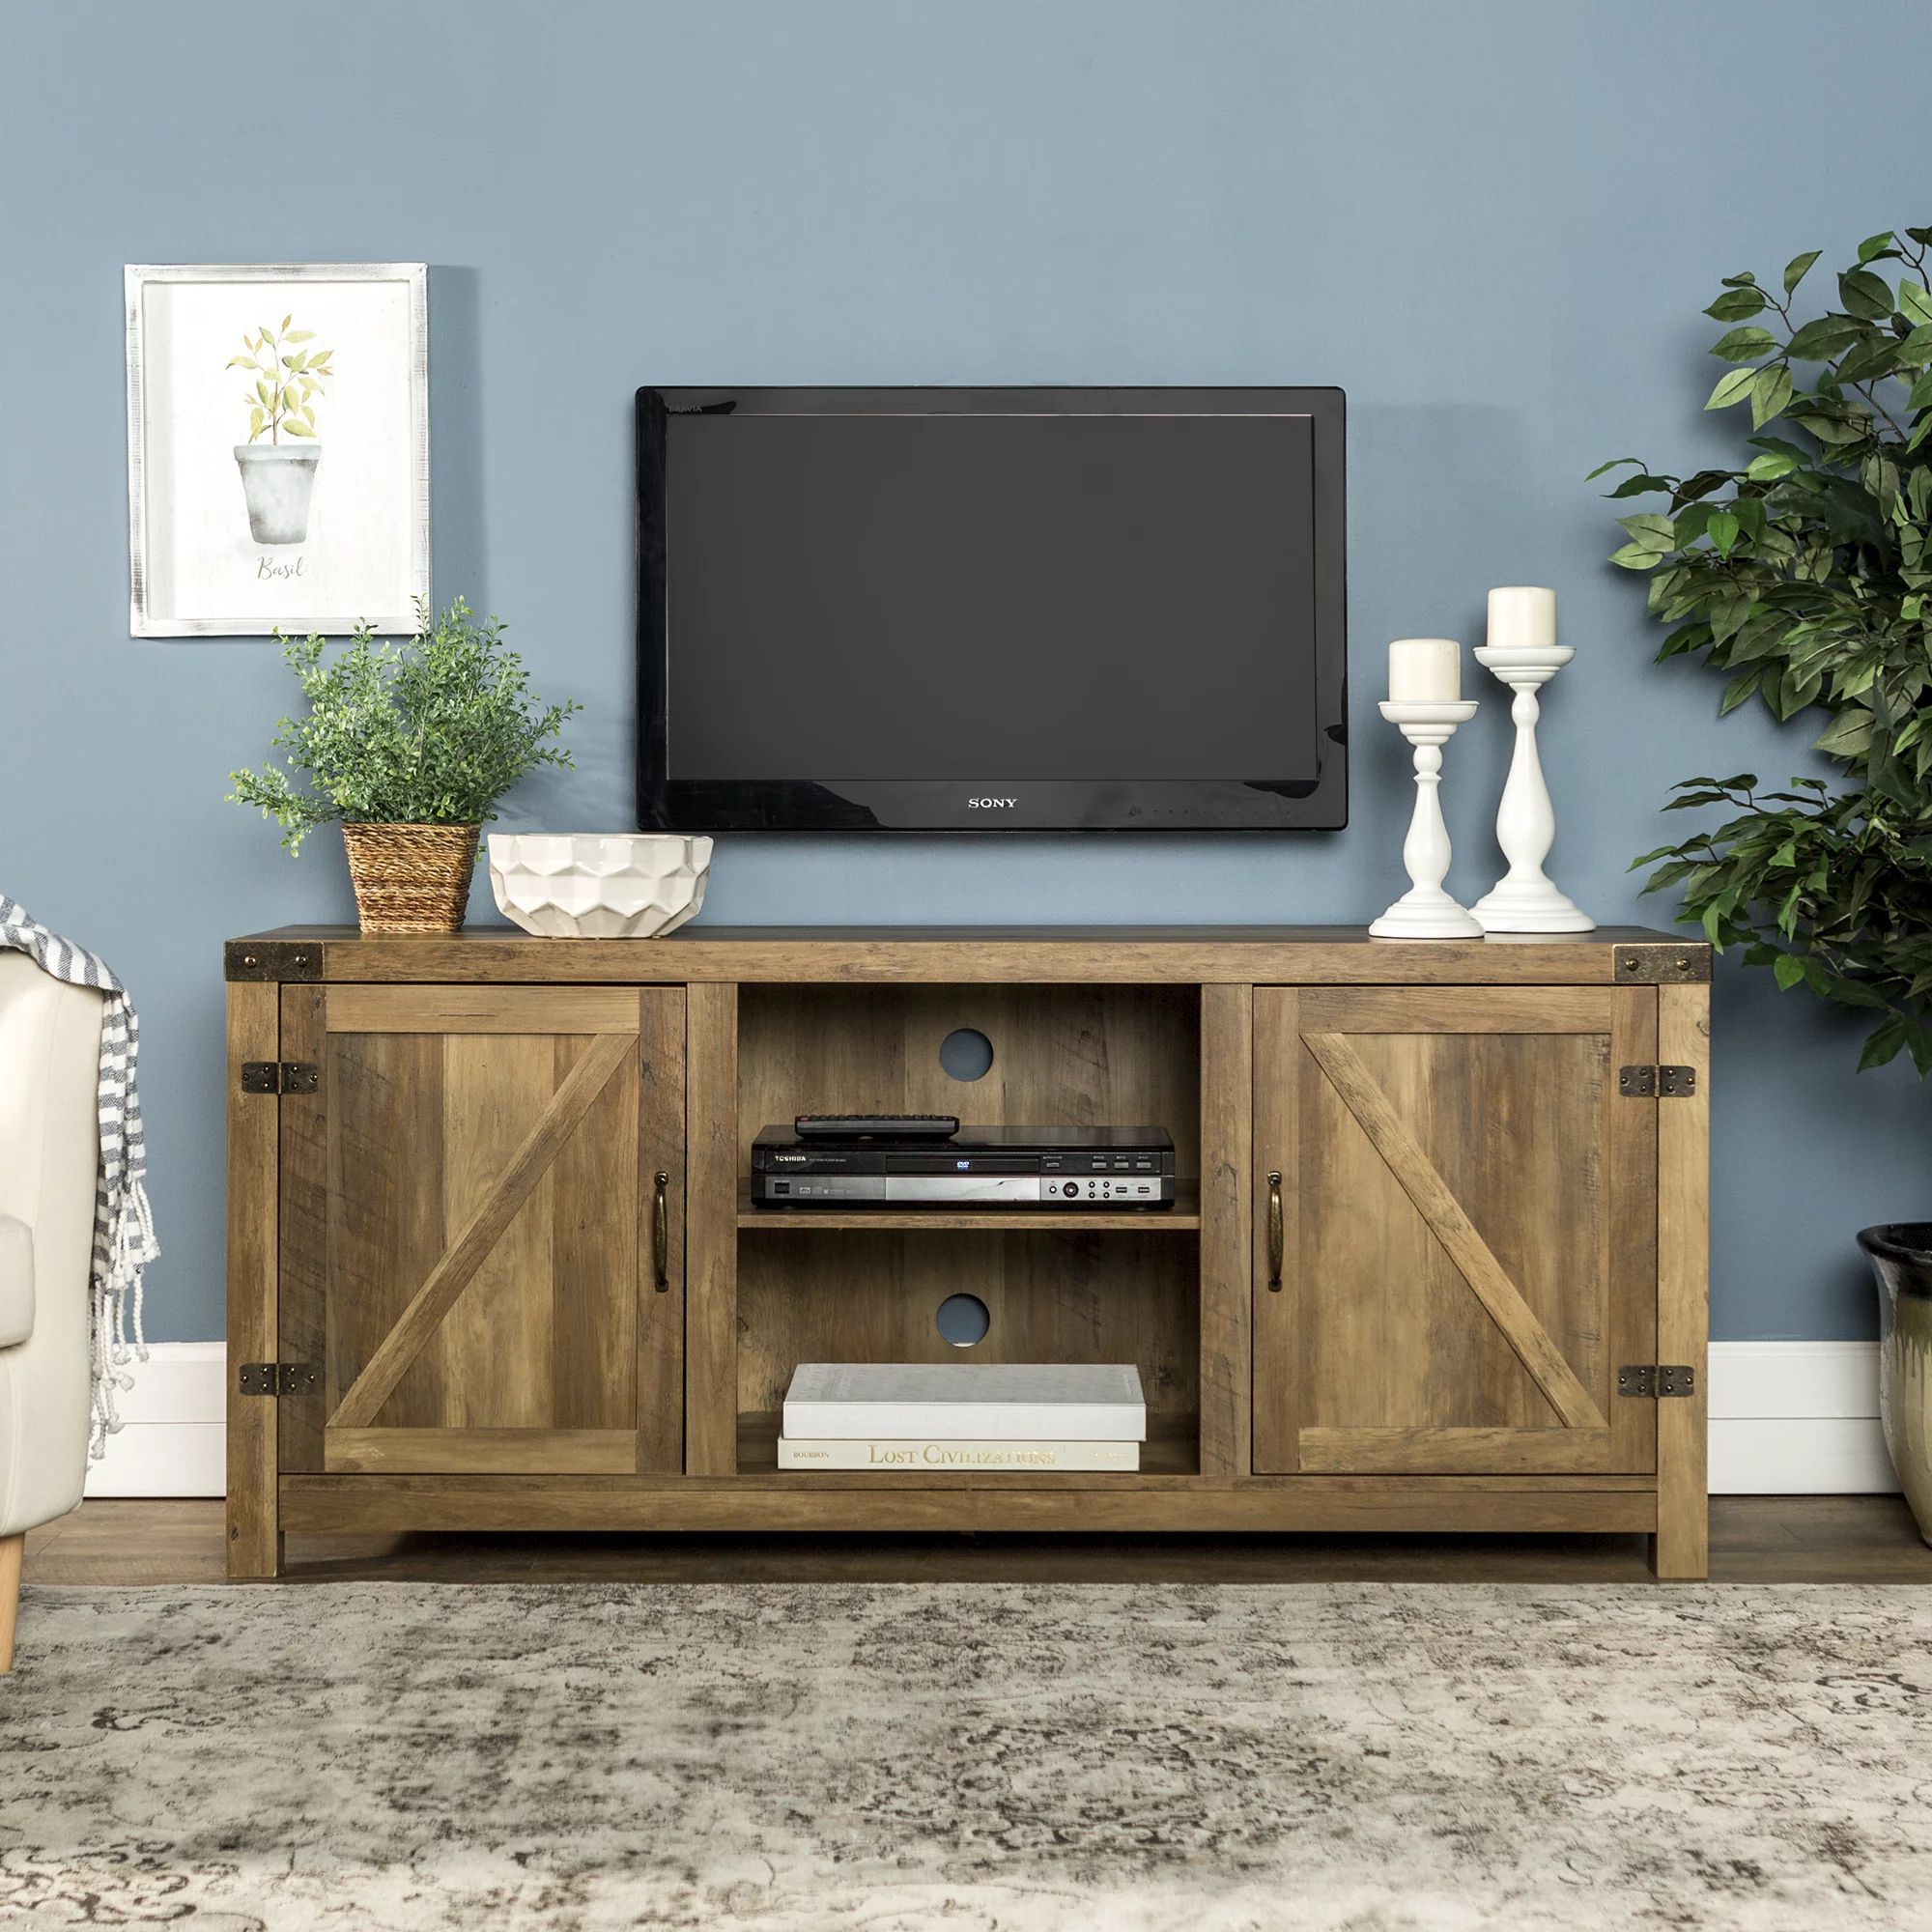 Manor Park Farmhouse TV Stand for TVs up to 65", Reclaimed Barnwood | Walmart (US)